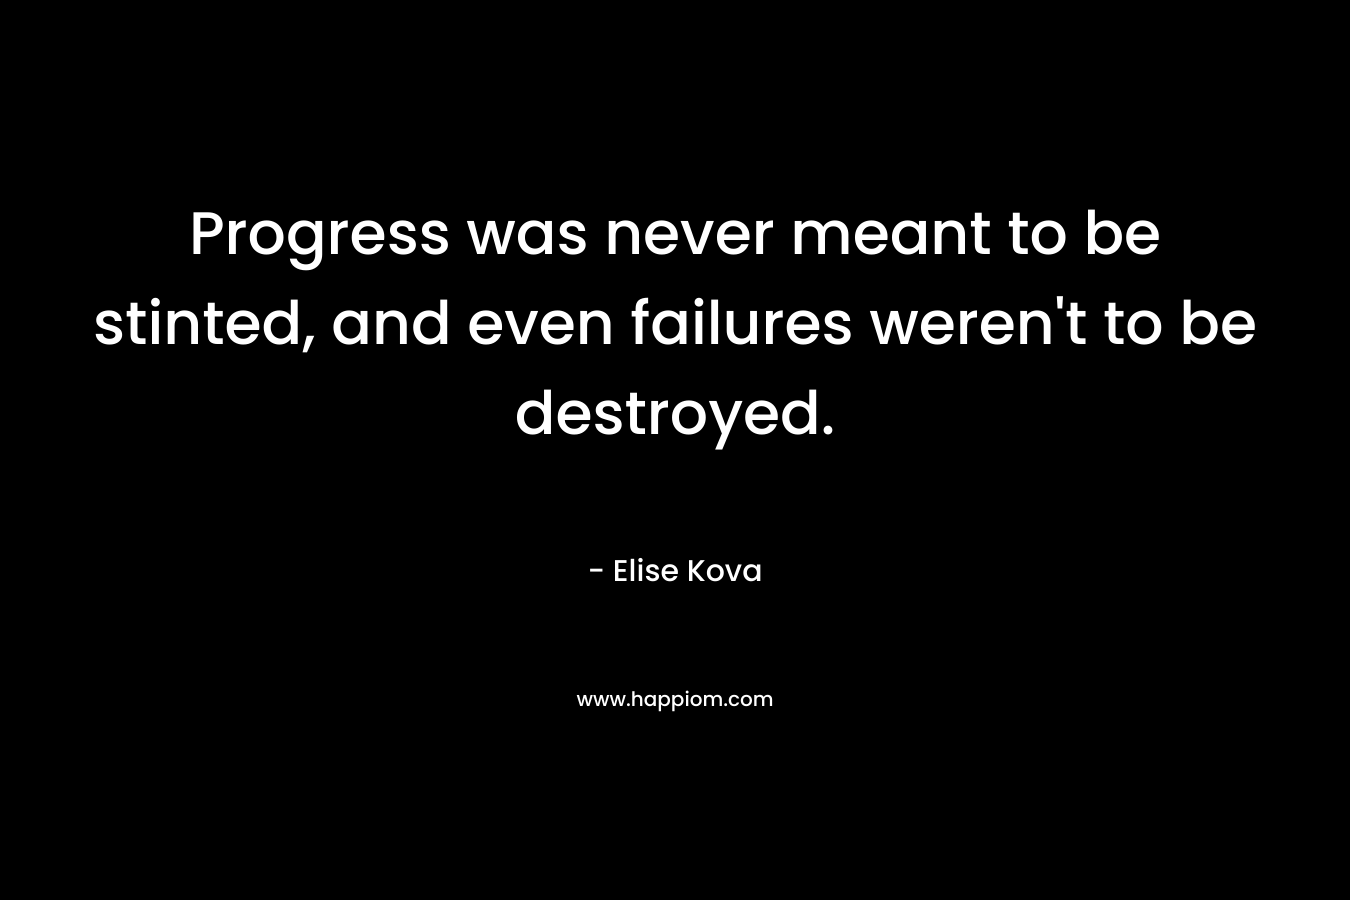 Progress was never meant to be stinted, and even failures weren’t to be destroyed. – Elise Kova